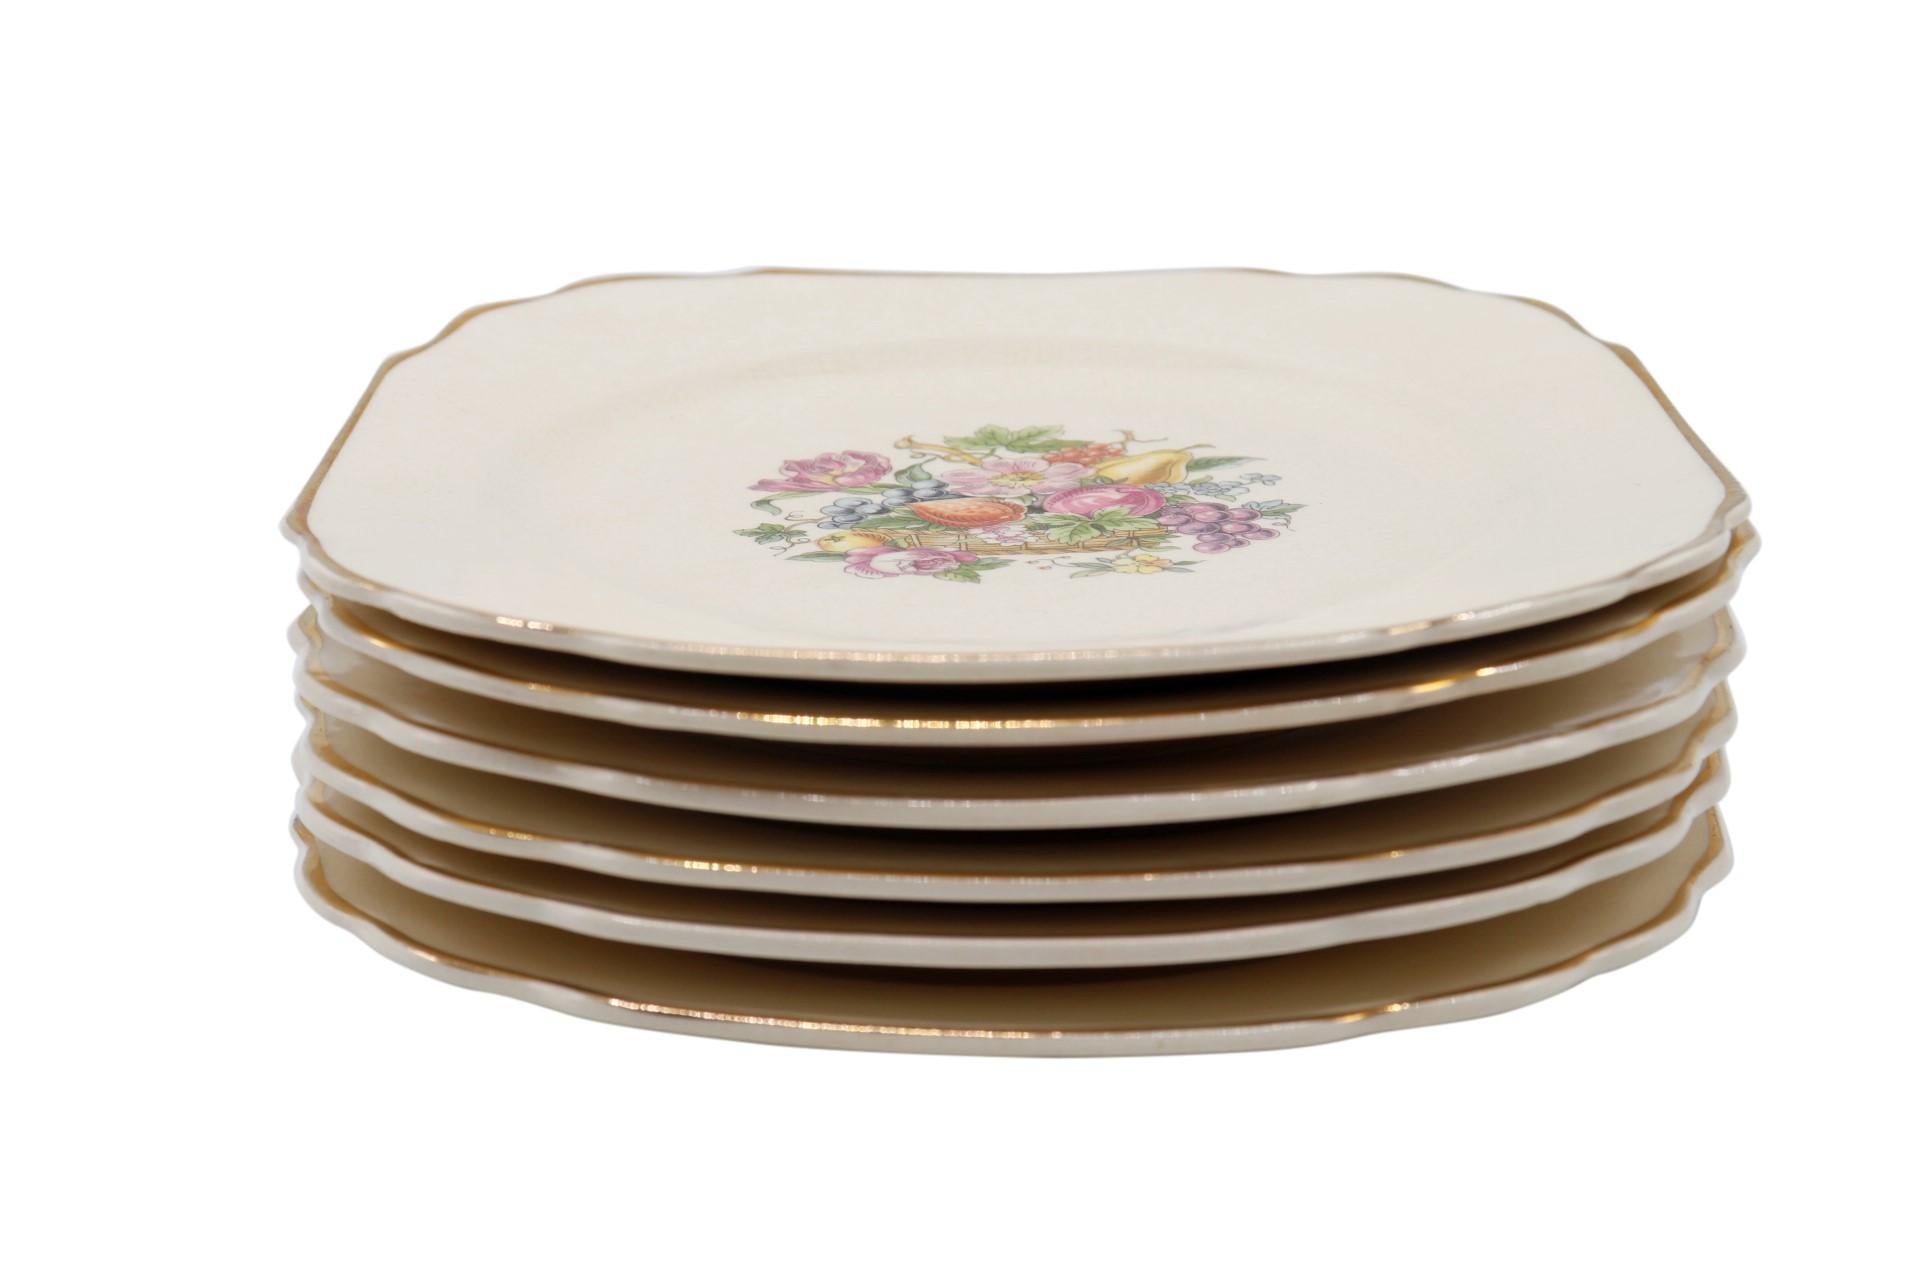 A set of six dessert or bread and butter plates made by Harker for Bakerite. Square plates are decorated in the 